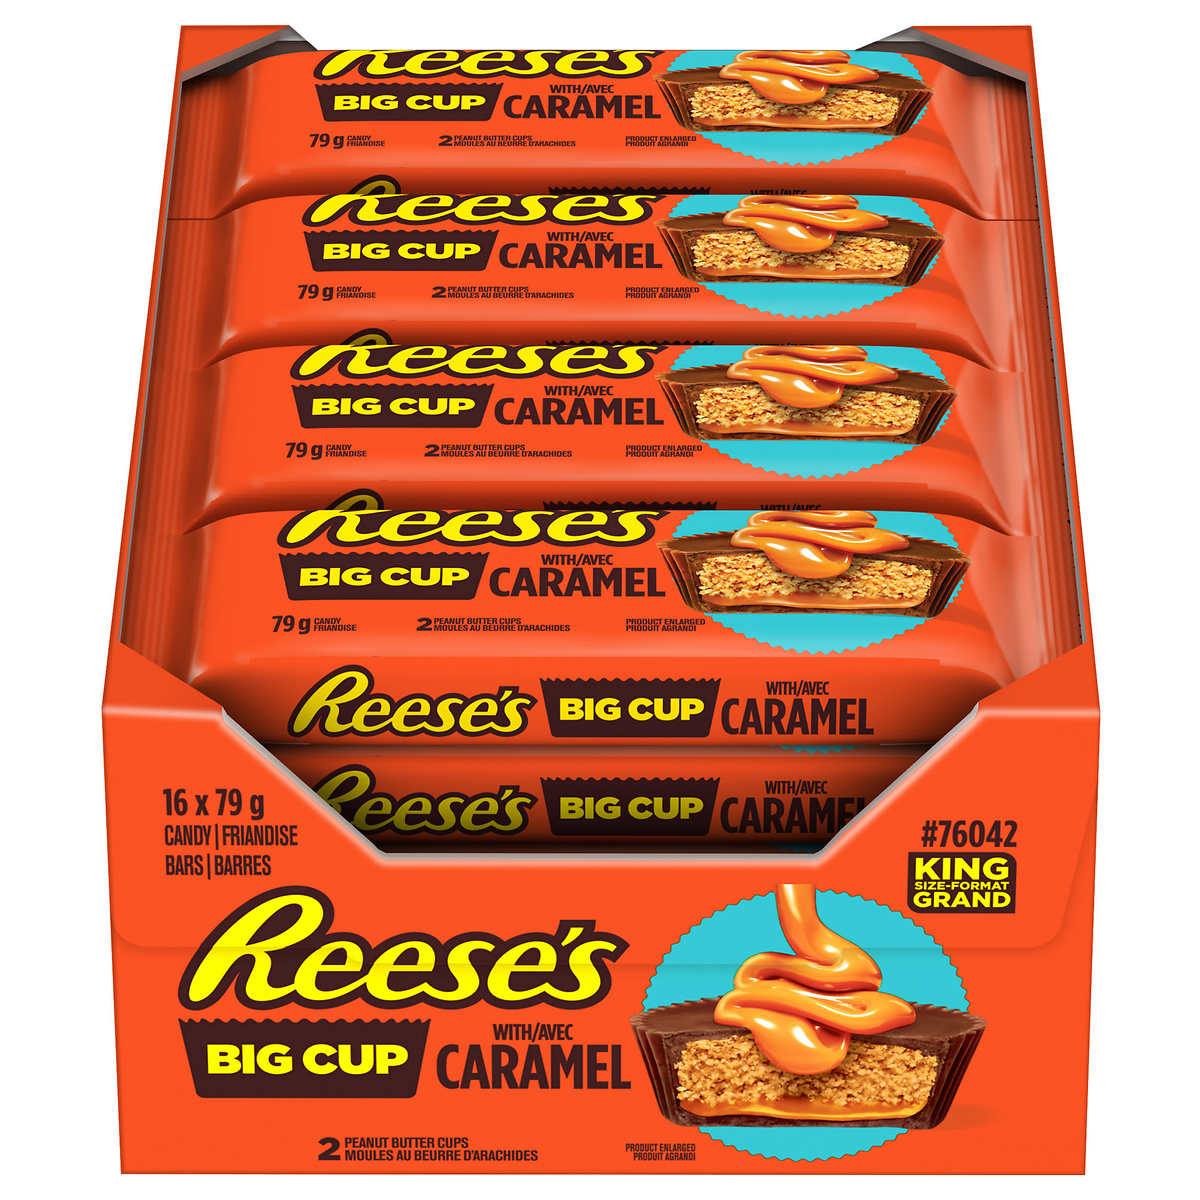 New Reese's Caramel Big Cup: Review!